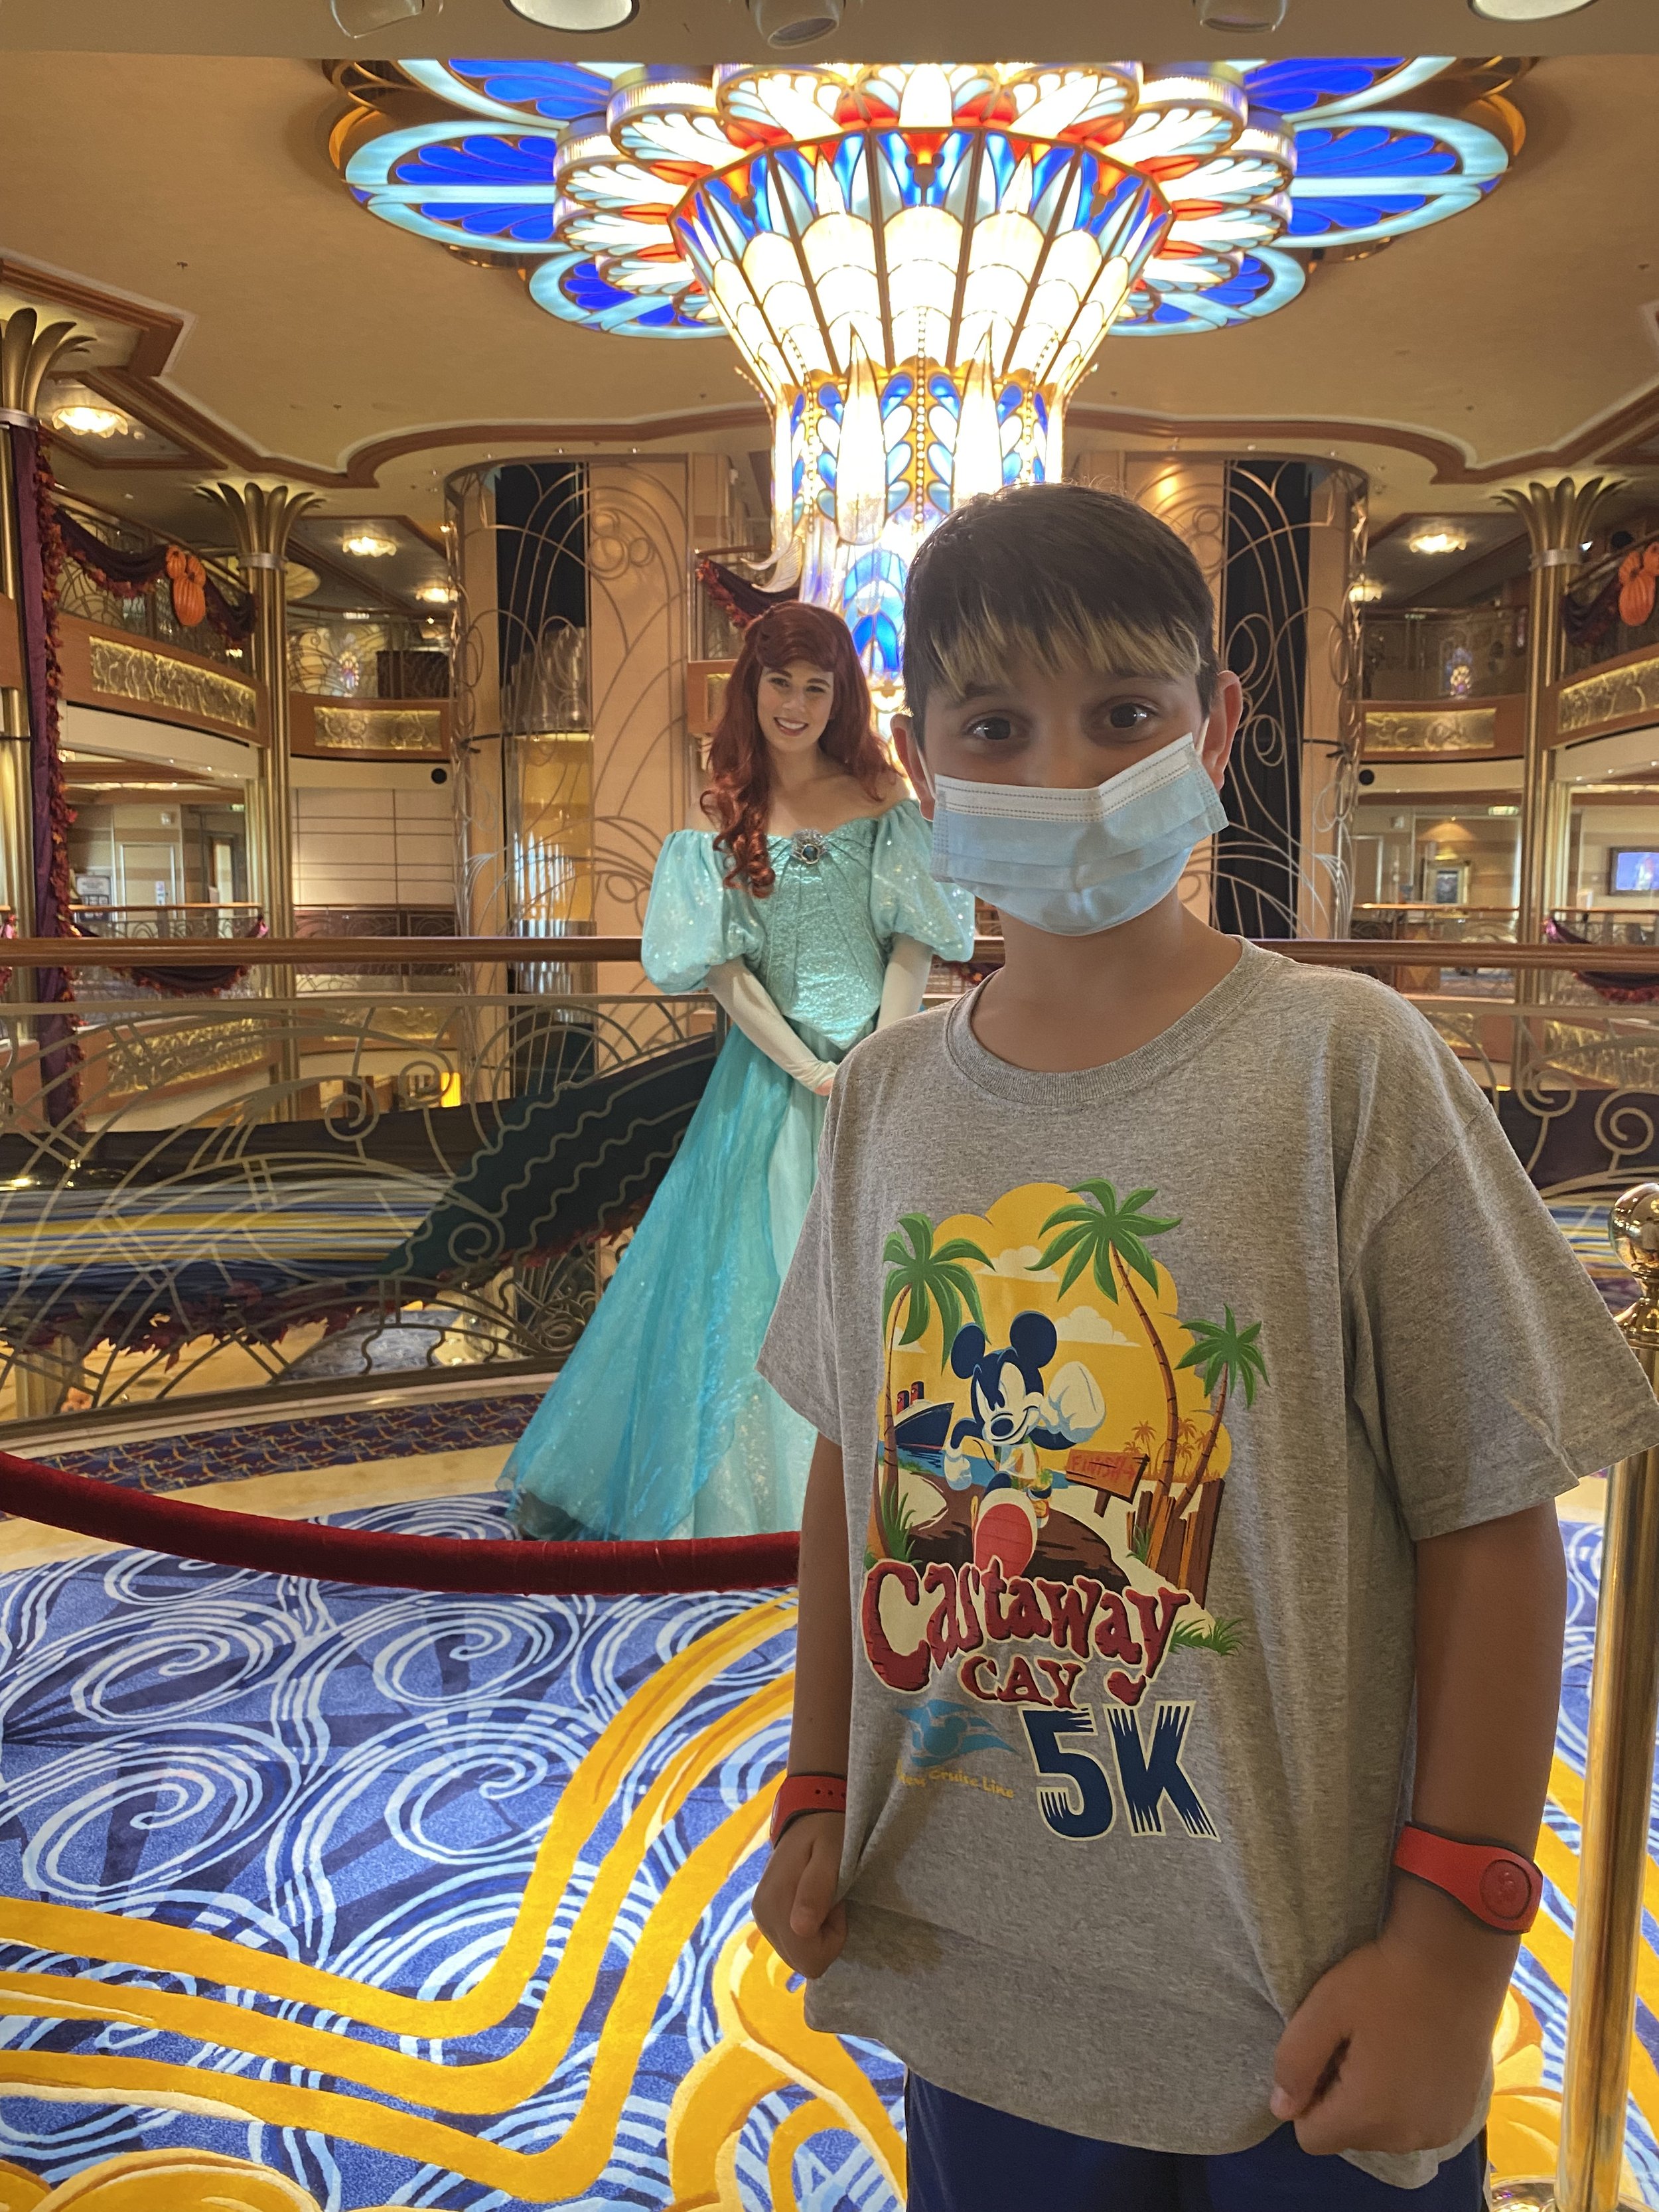  There are Disney characters and princesses throughout the ship. If you’re into meeting Disney characters, there’s no better place than a Disney Cruise. You won’t find long lines like in the theme parks and you get to spend more time with them.   Her